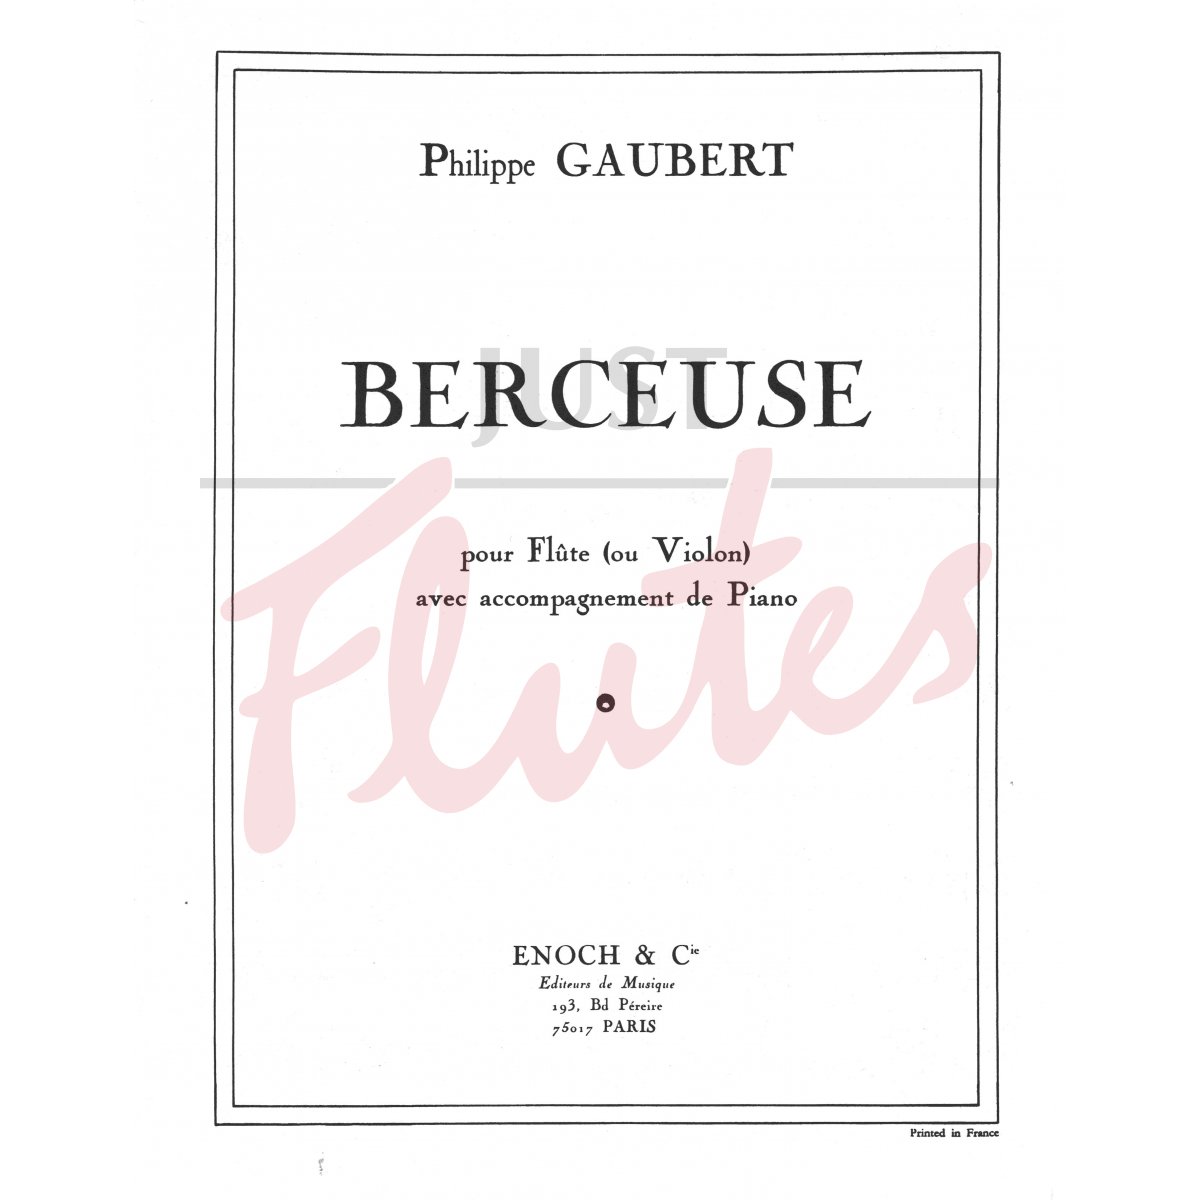 Berceuse for Flute (or Violin) and Piano